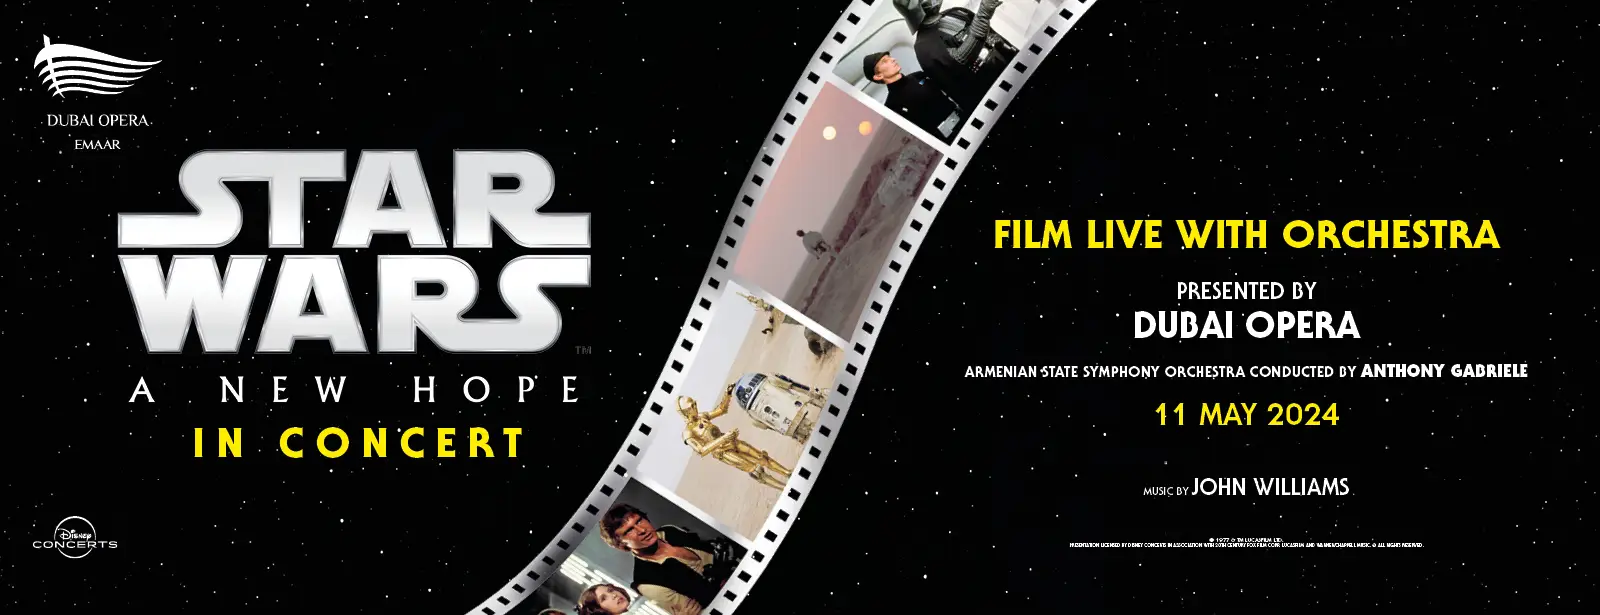 Star Wars: A New Hope in Concert at Dubai Opera || Wow-Emirates